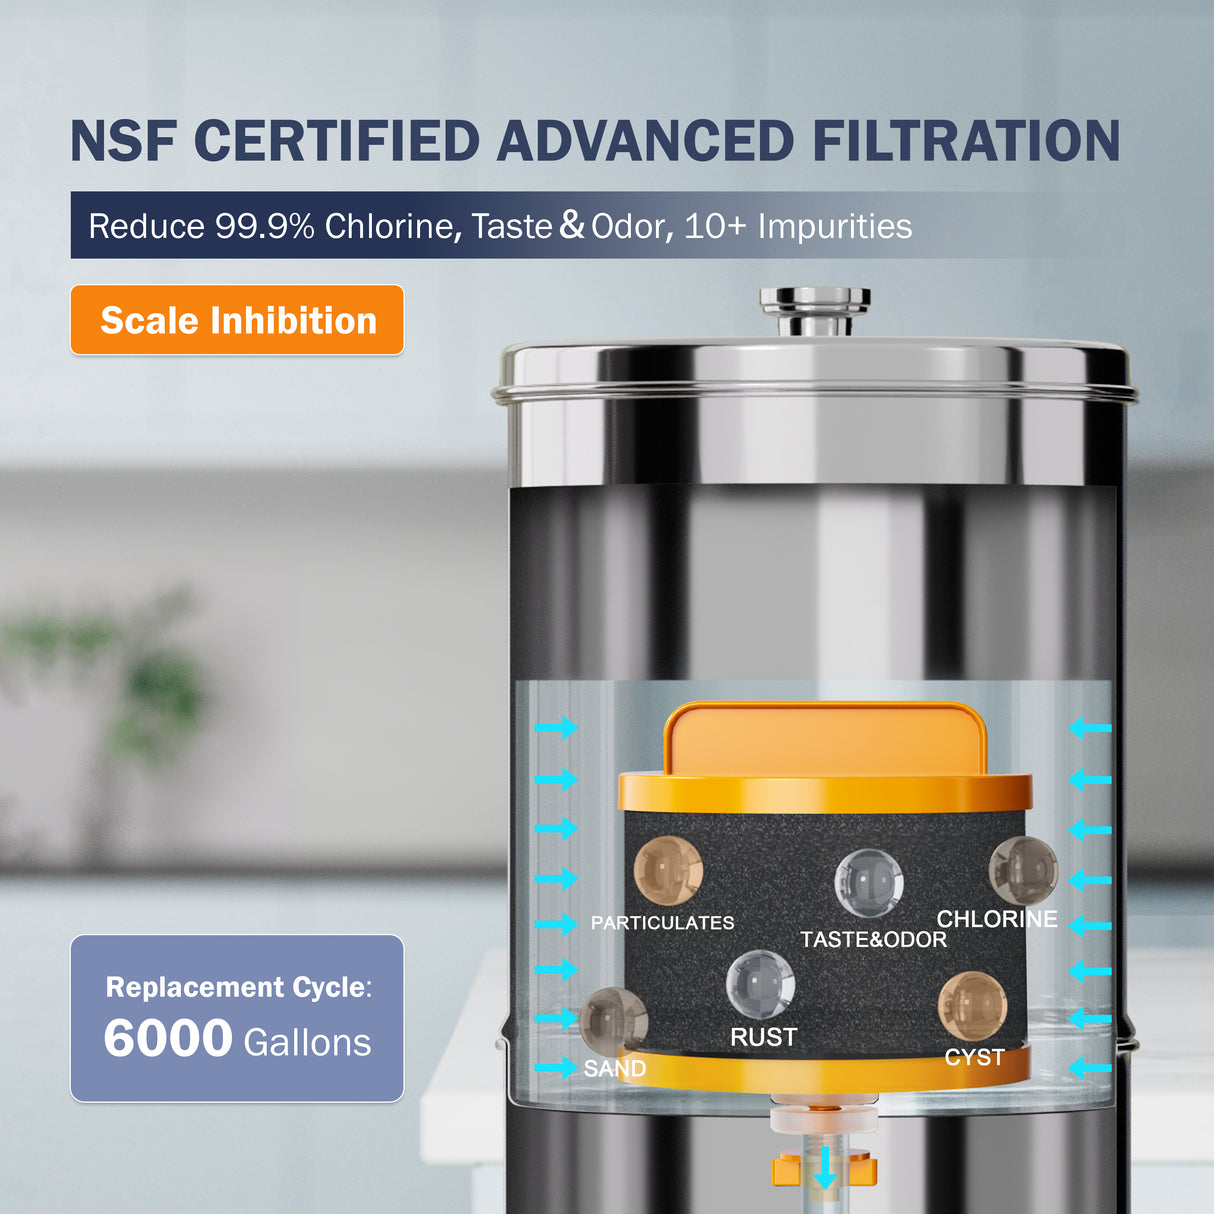 Frizzlife G210-SCALE Gravity-Fed Water Filter System, NSF Certified Element with Scale Inhibition Reduces 99.9% Chlorine, Taste & Odor, Impurity, Purifier System with Stand for Home, Camping, 2.25G